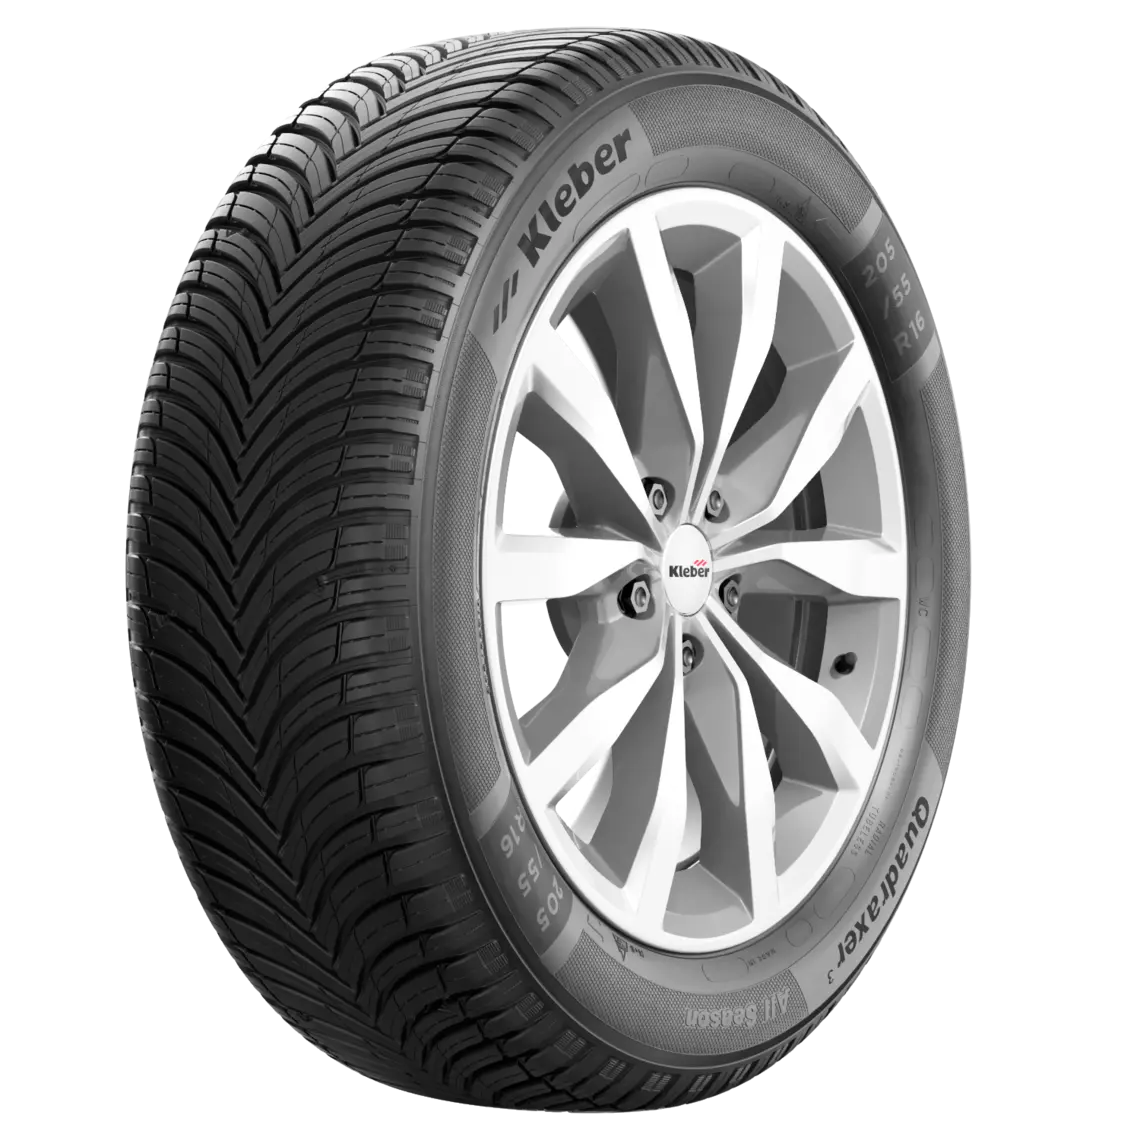 Kleber Quadraxer 3 - Tyre Reviews and Tests